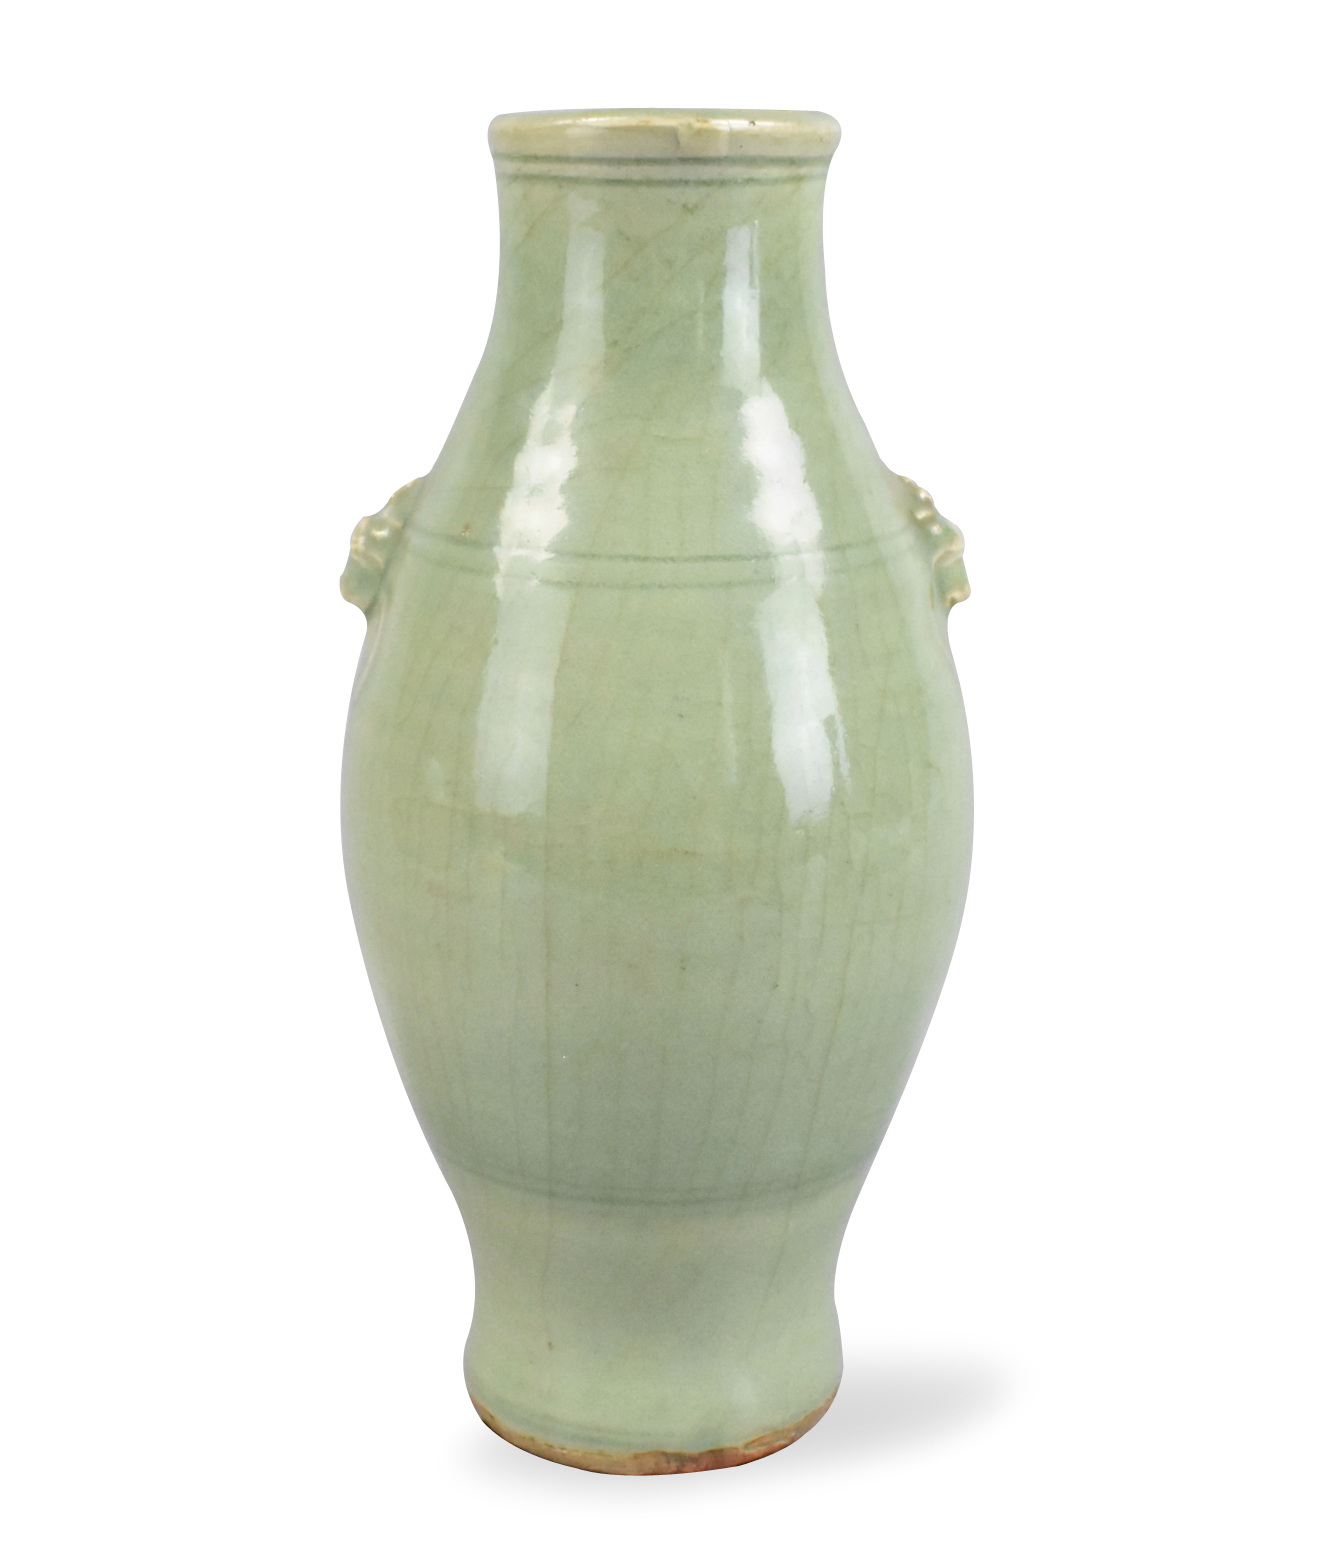 CHINESE LONGQUAN WARE CELADON VASE  33a32f